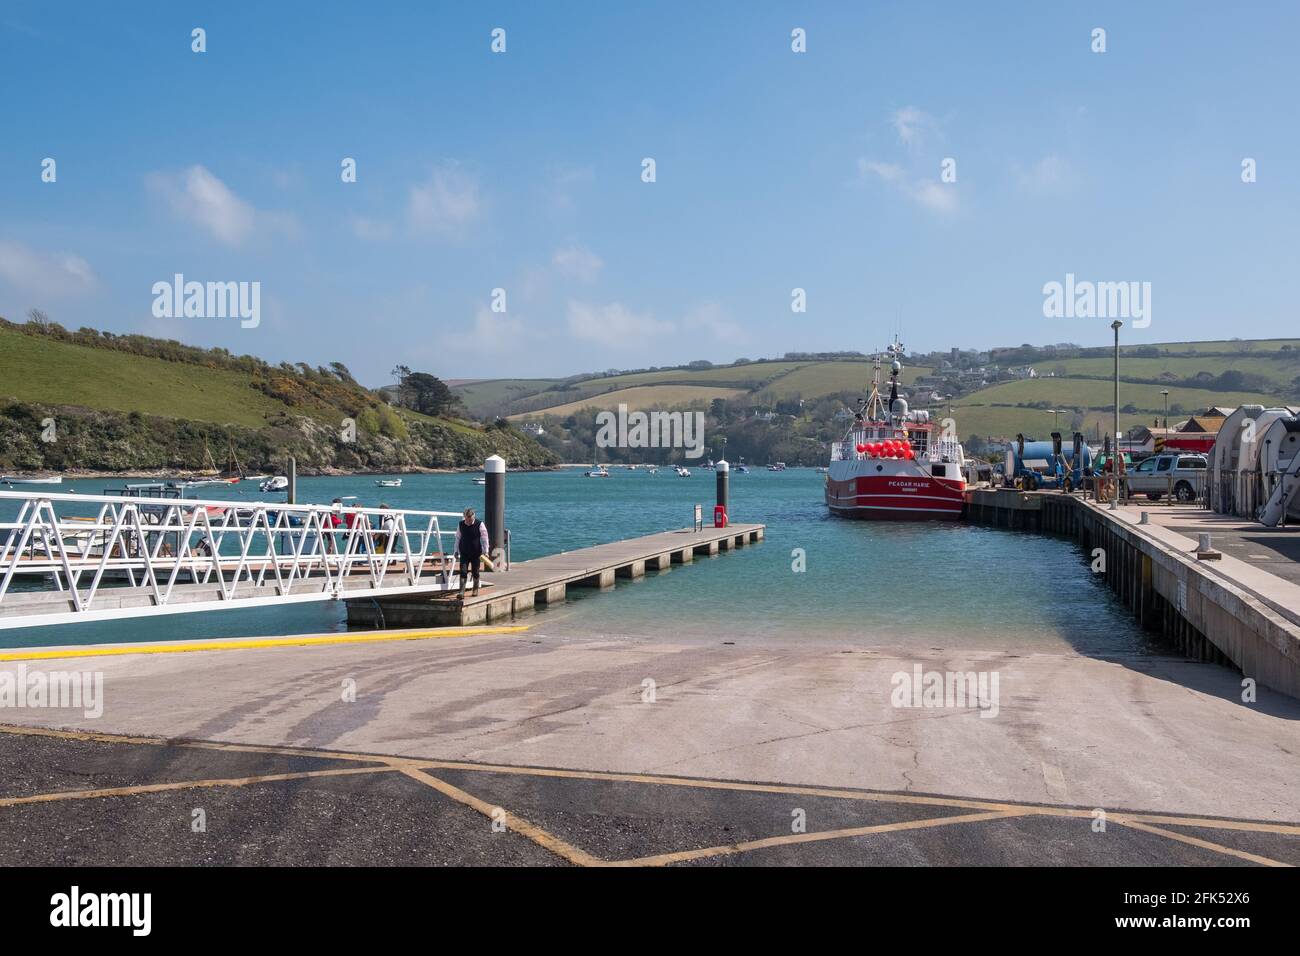 The slipway at Batson in Salcombe, South Hams used for launching and retrieving boats and dinghies Stock Photo